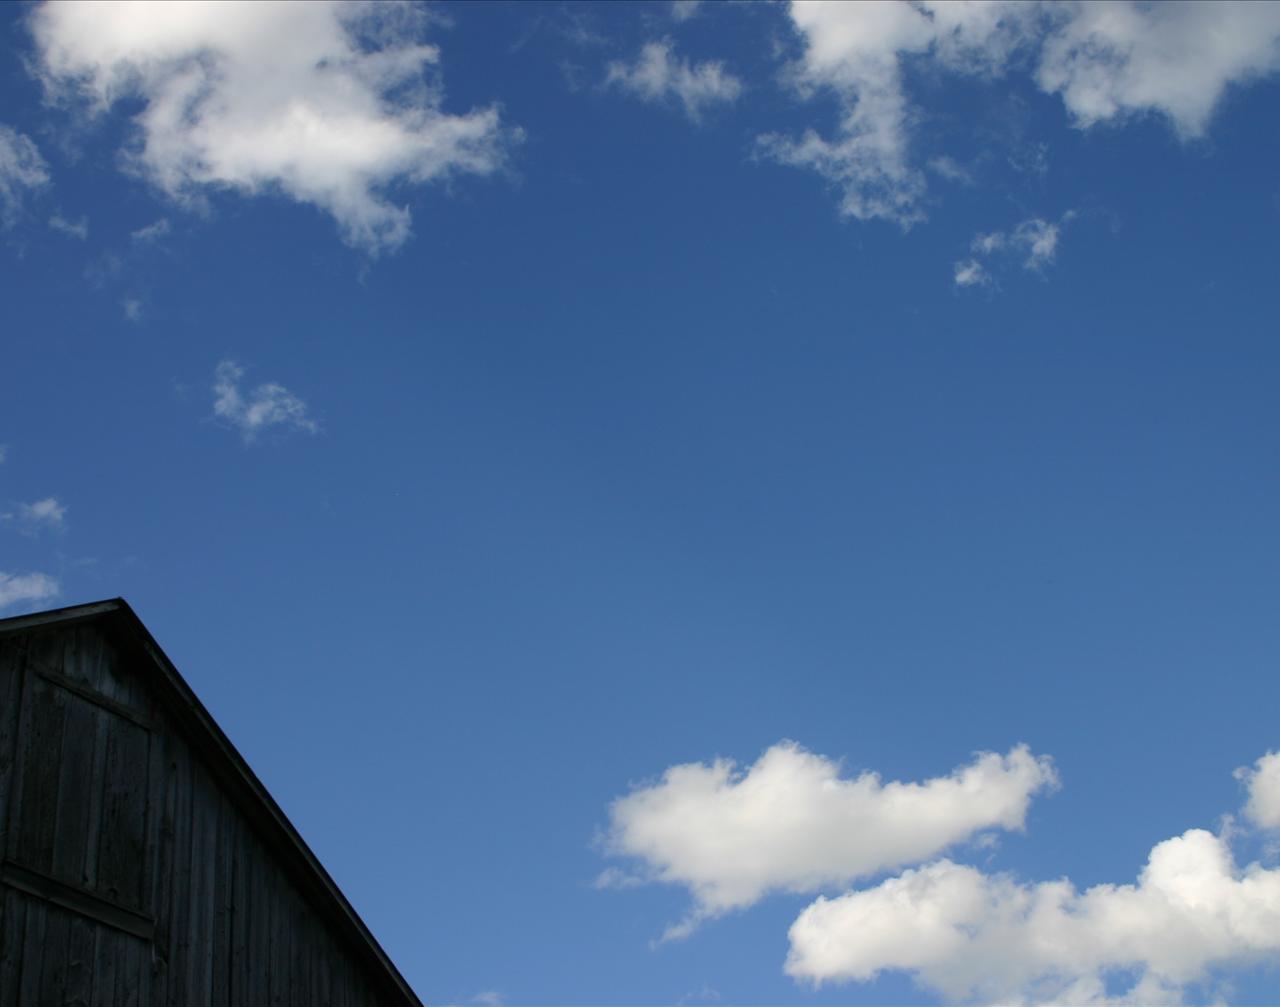 Sky with Barn Backgrounds